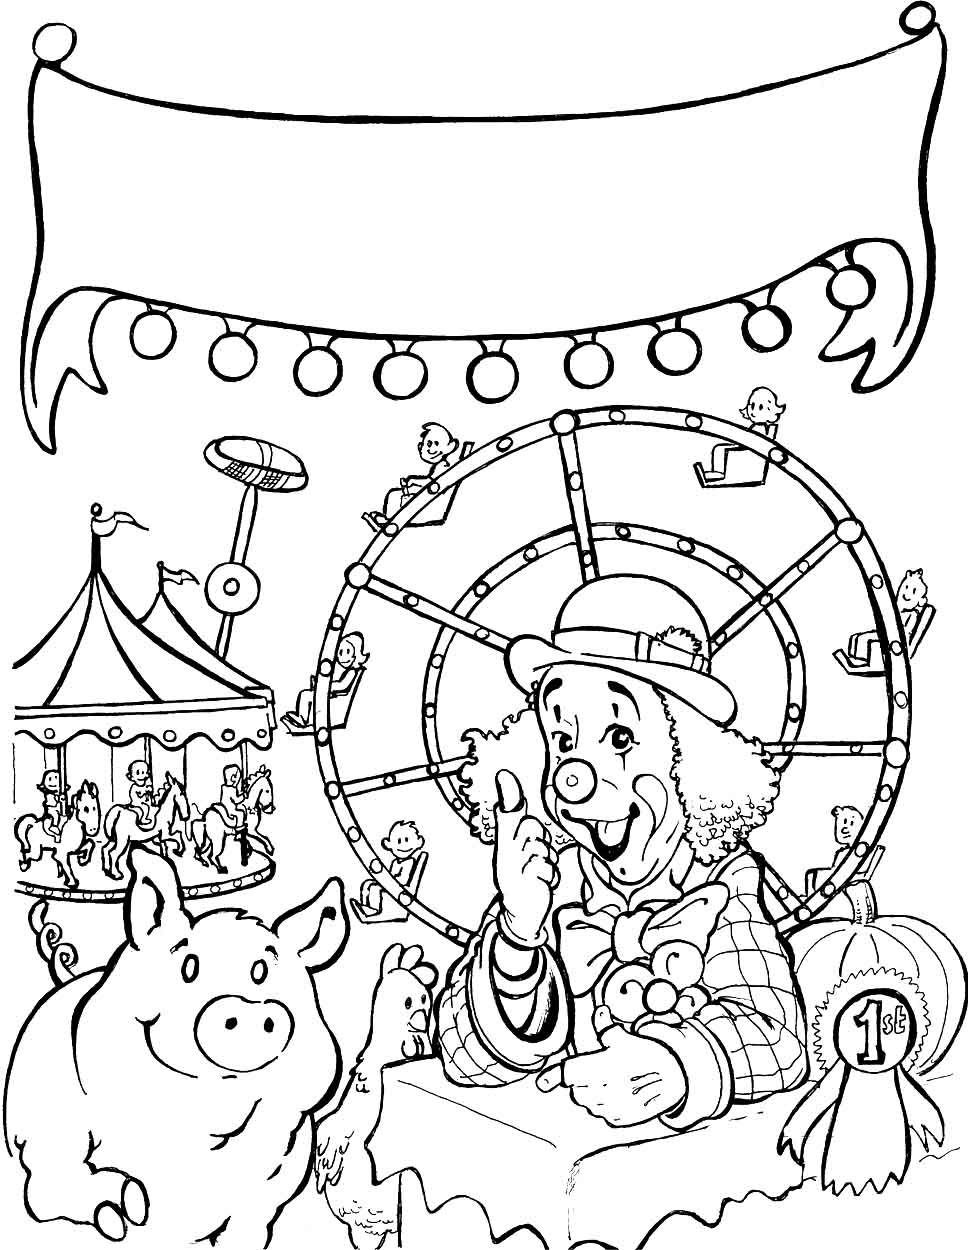 coloring-pages-carnival-amusepark-carnival-coloring-pages-best-place-to-color-printable